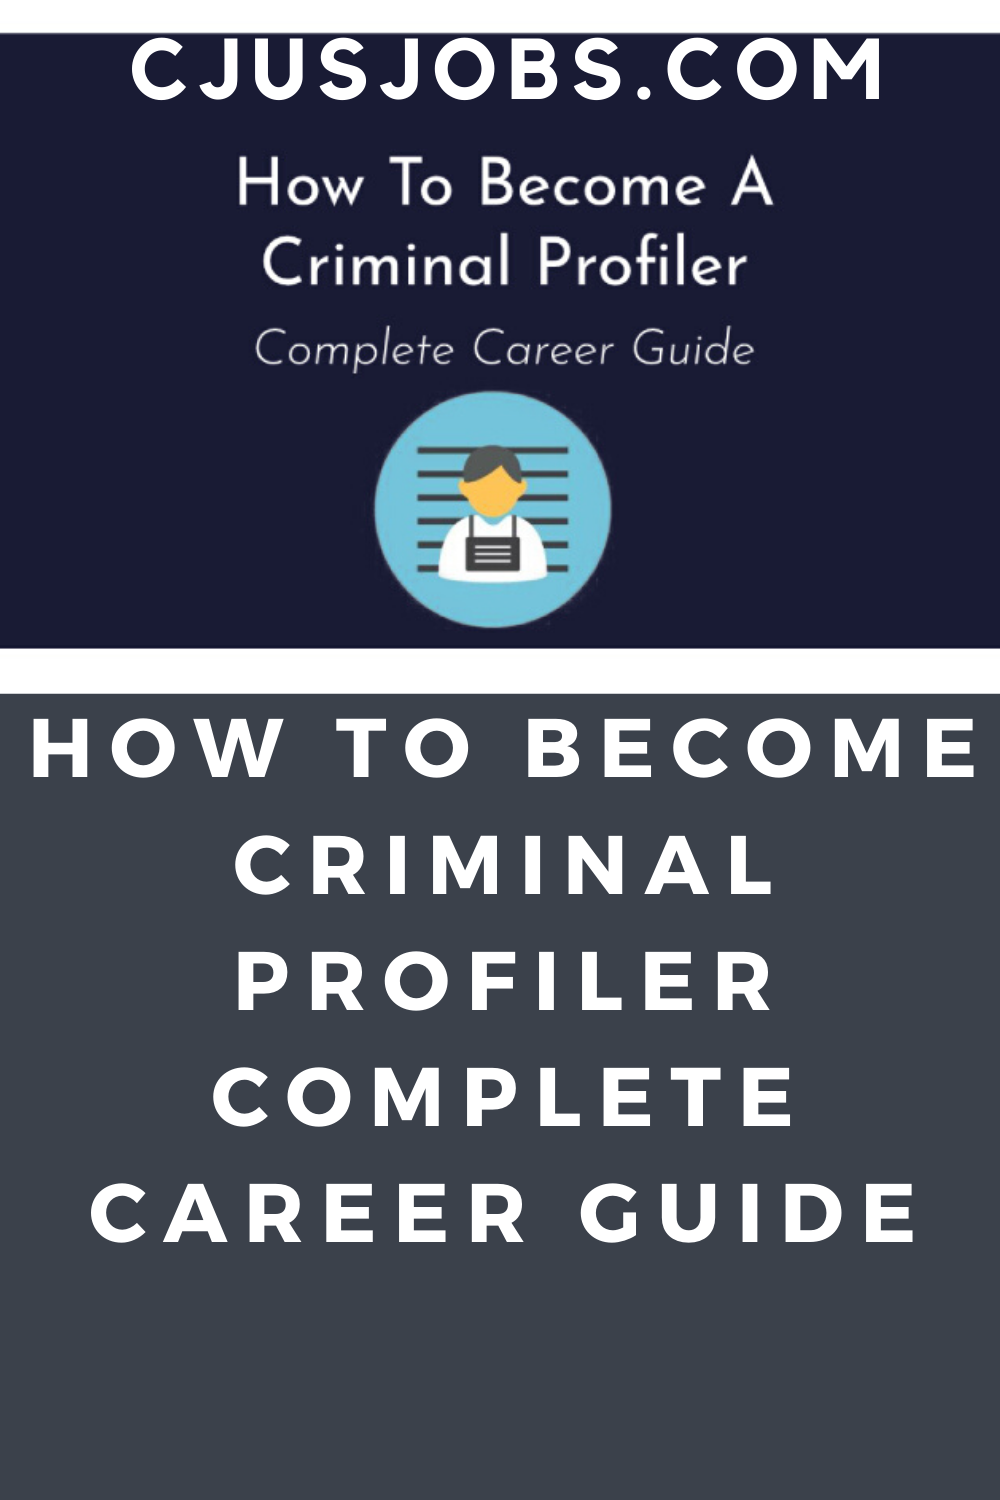 How To Become A Criminal Profiler Complete Career Guide in 2020 ...